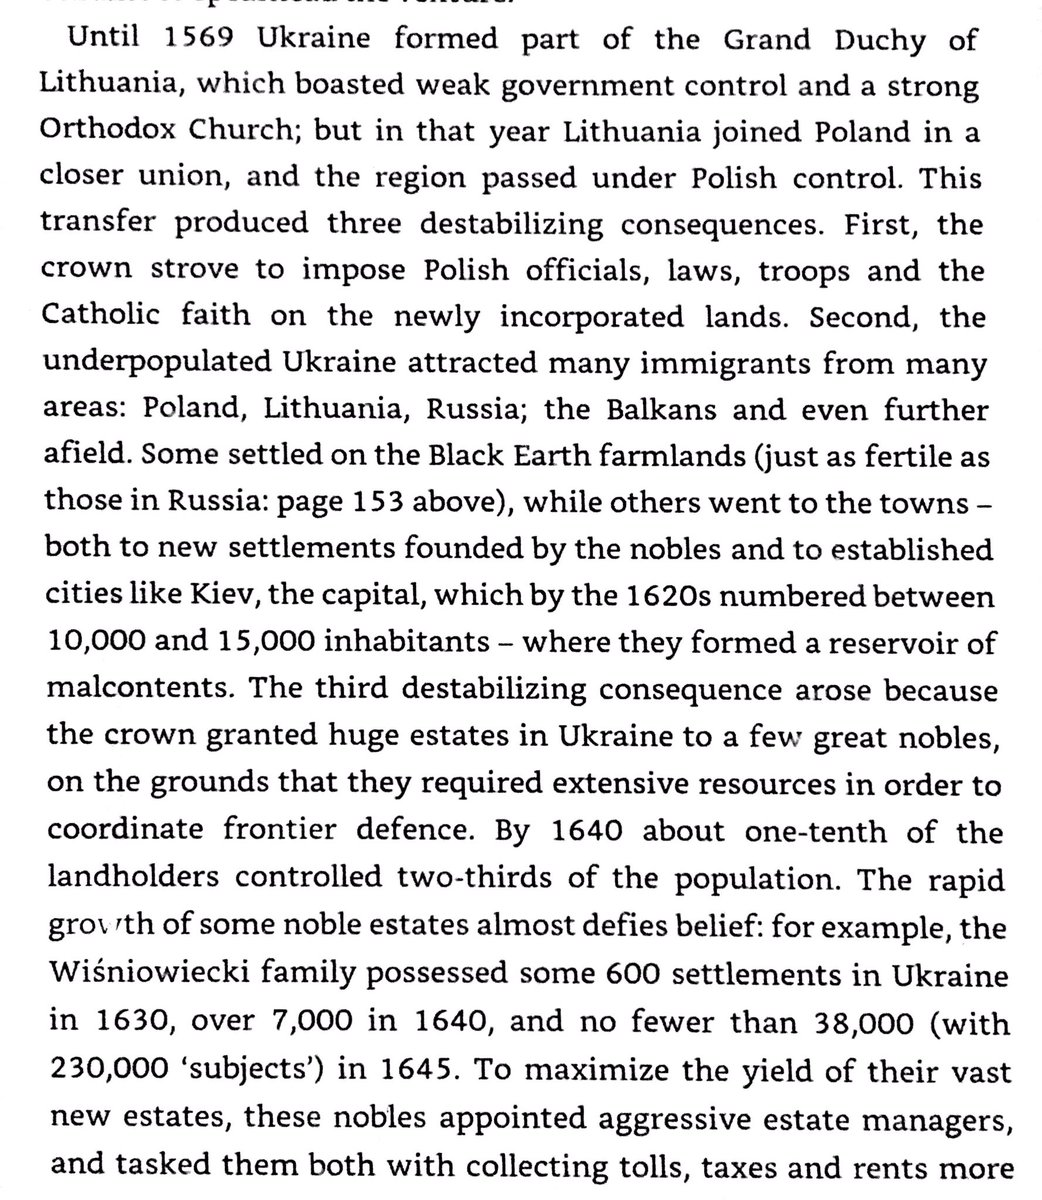 By 1640, 10% of the landholders in Polish Ukraine controlled 2/3rds of the population - justified by the nobles needing to fund frontier defenses. One Polish family ruled 230,000 people.